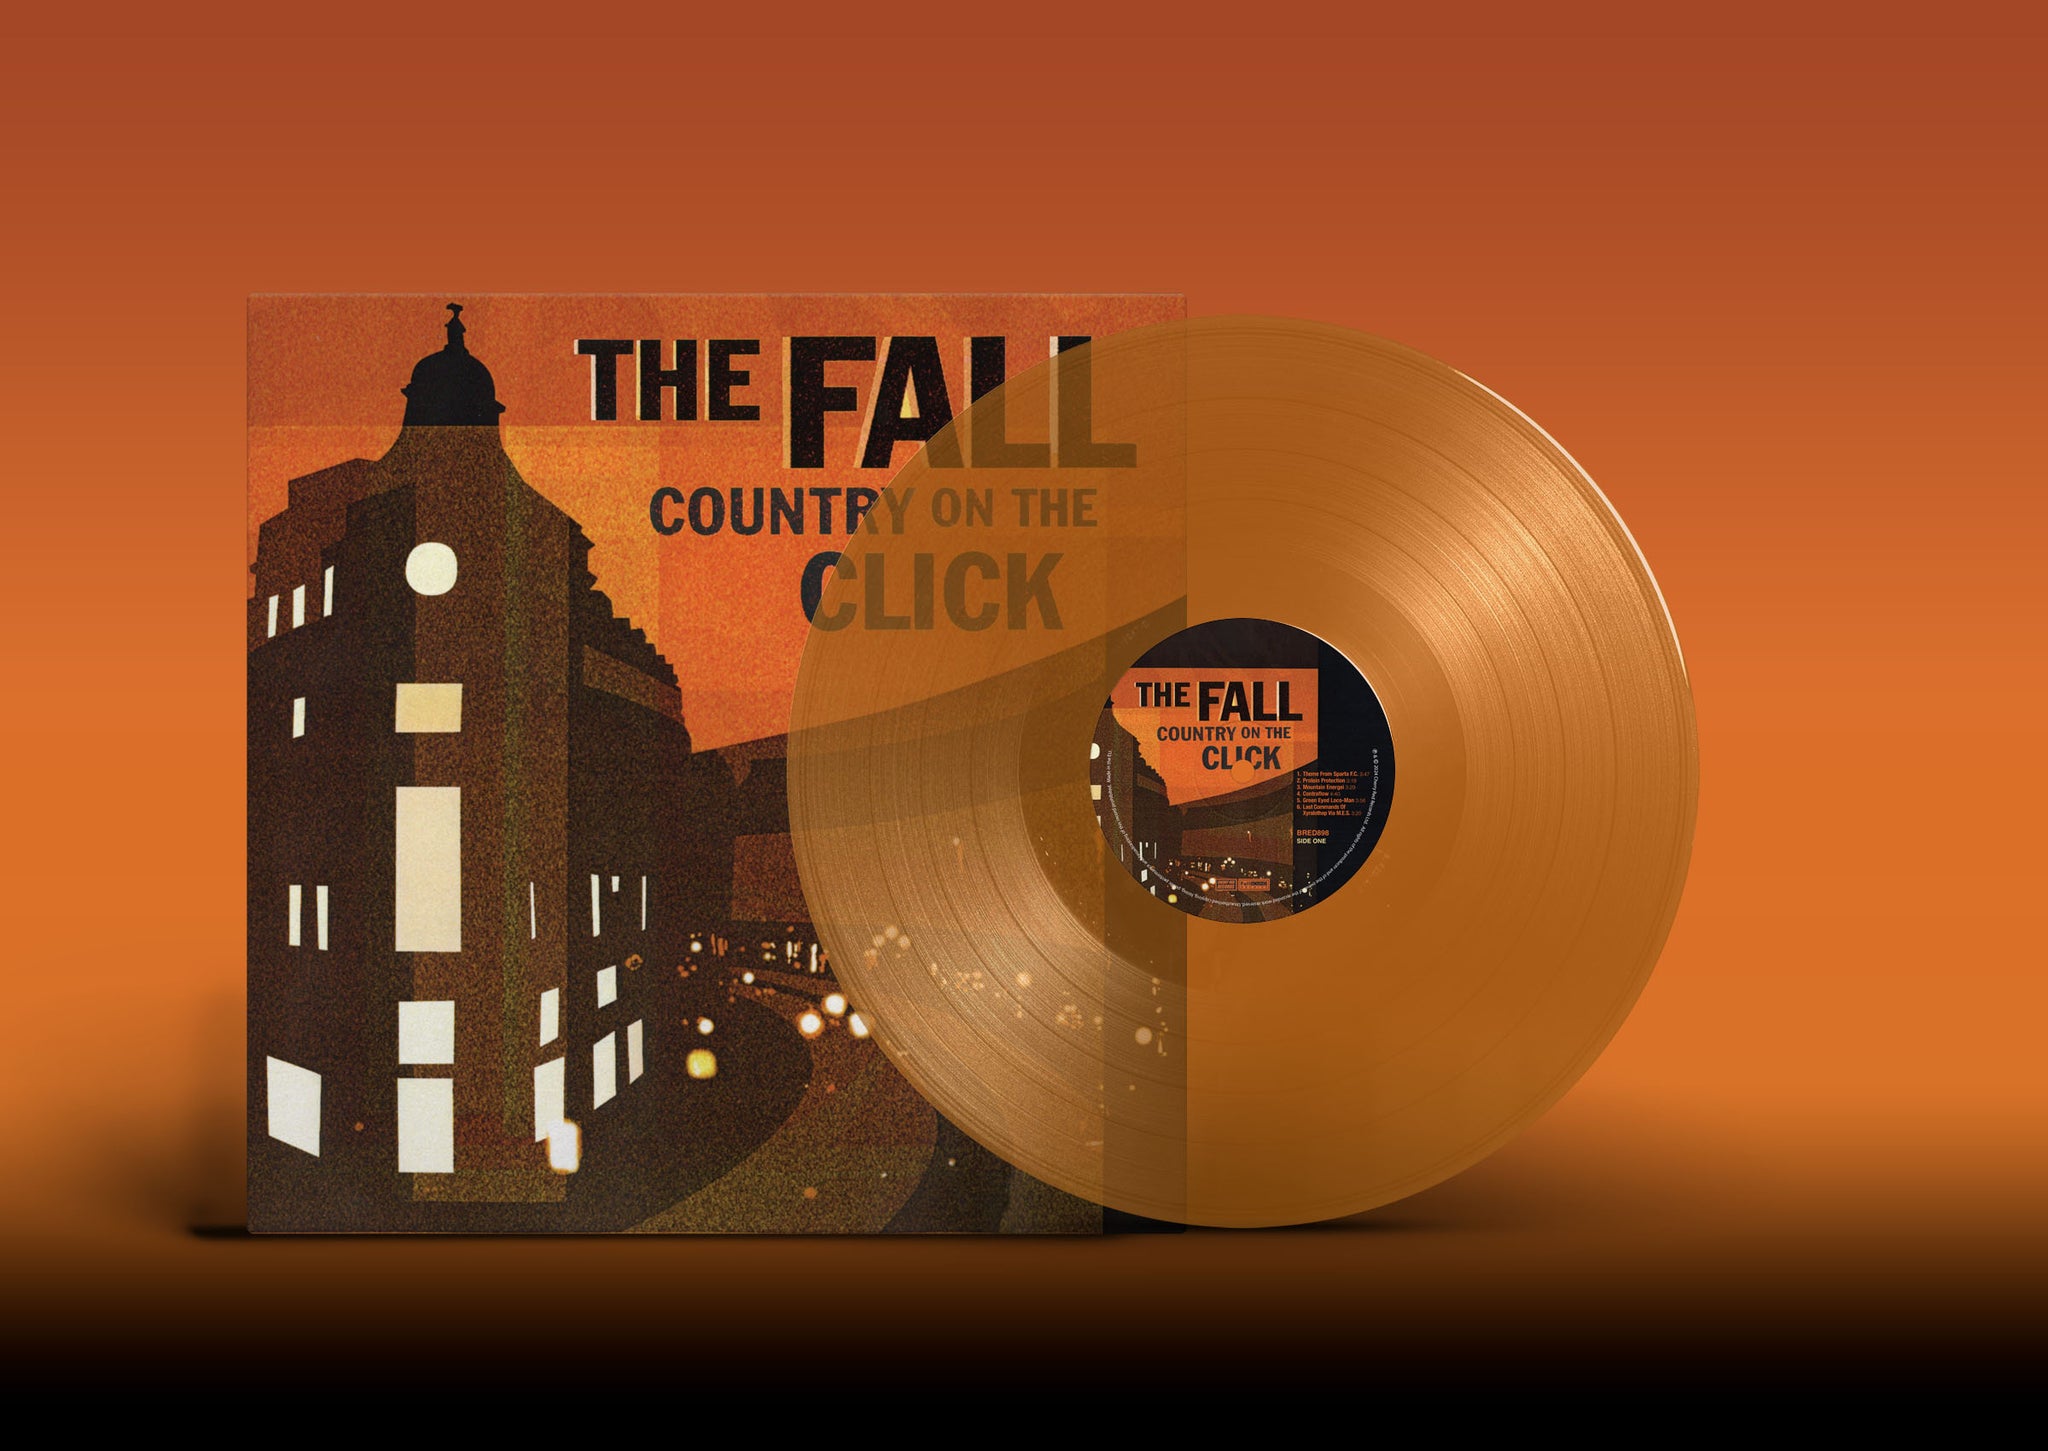 THE FALL - A Country On The Click (Alternative Version) - 1 LP - Translucent Orange Vinyl  [RSD 2024]